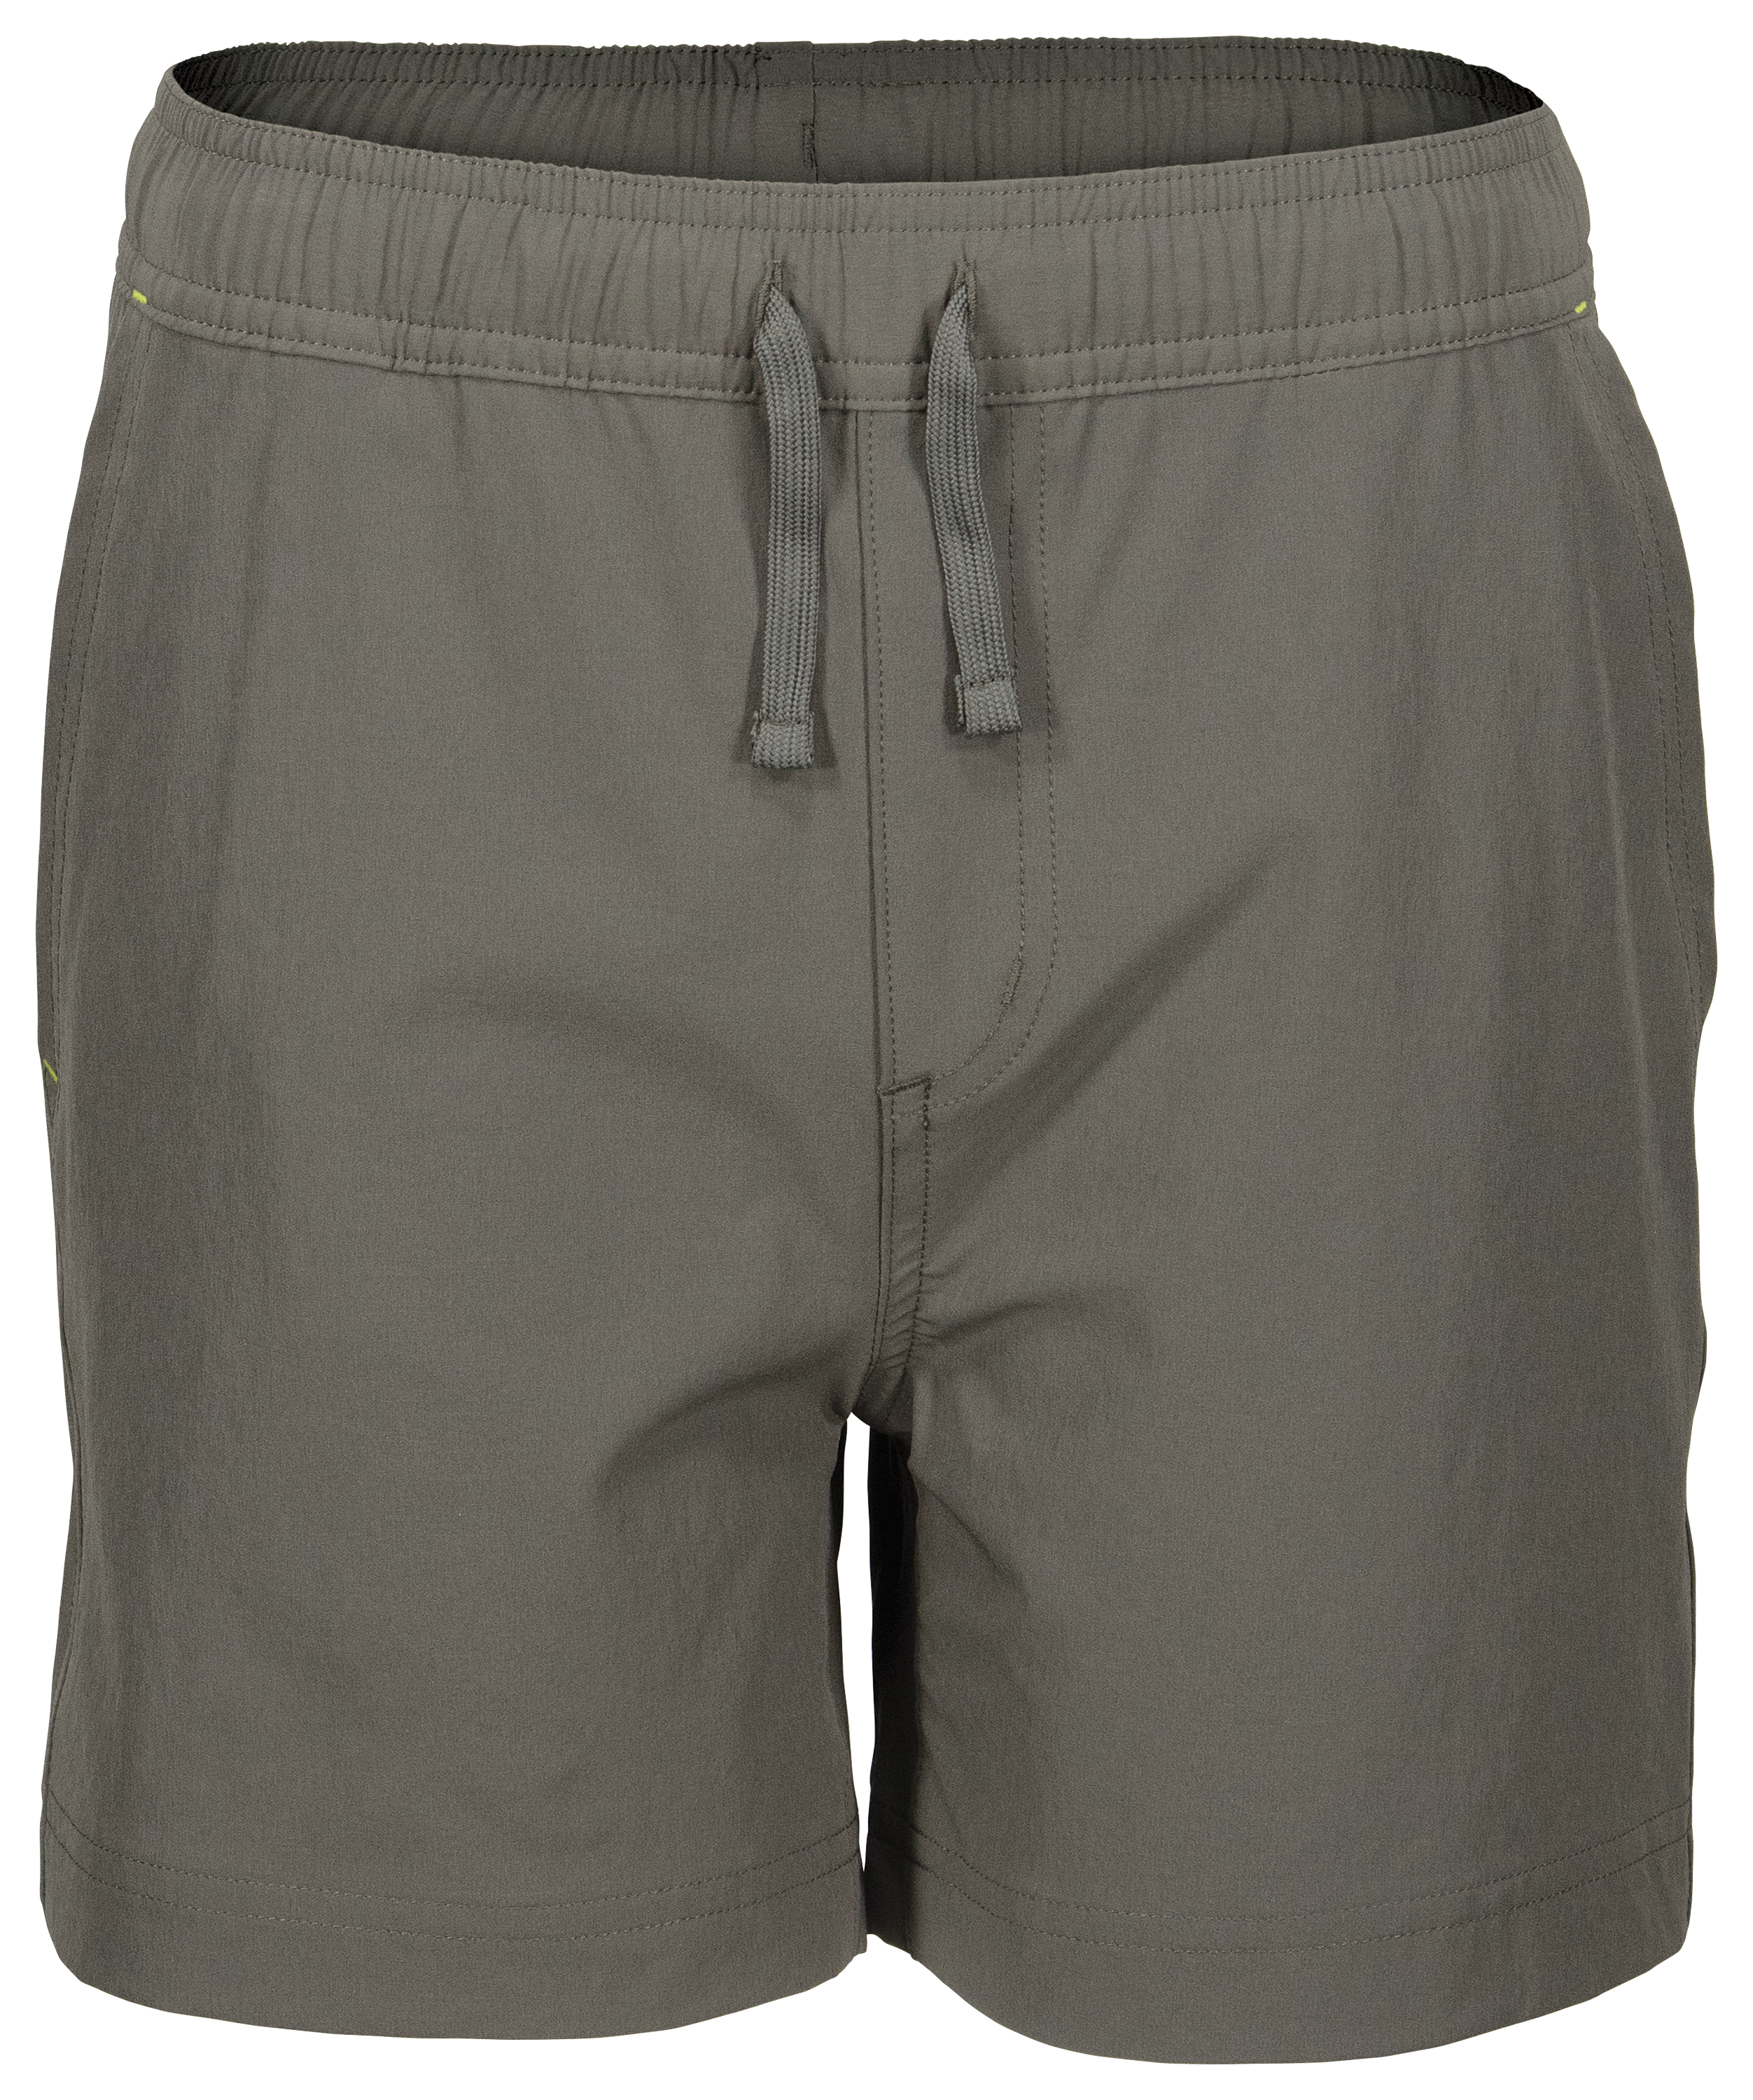 World Wide Sportsman Charter Pull-On Shorts for Boys - Gray - XS